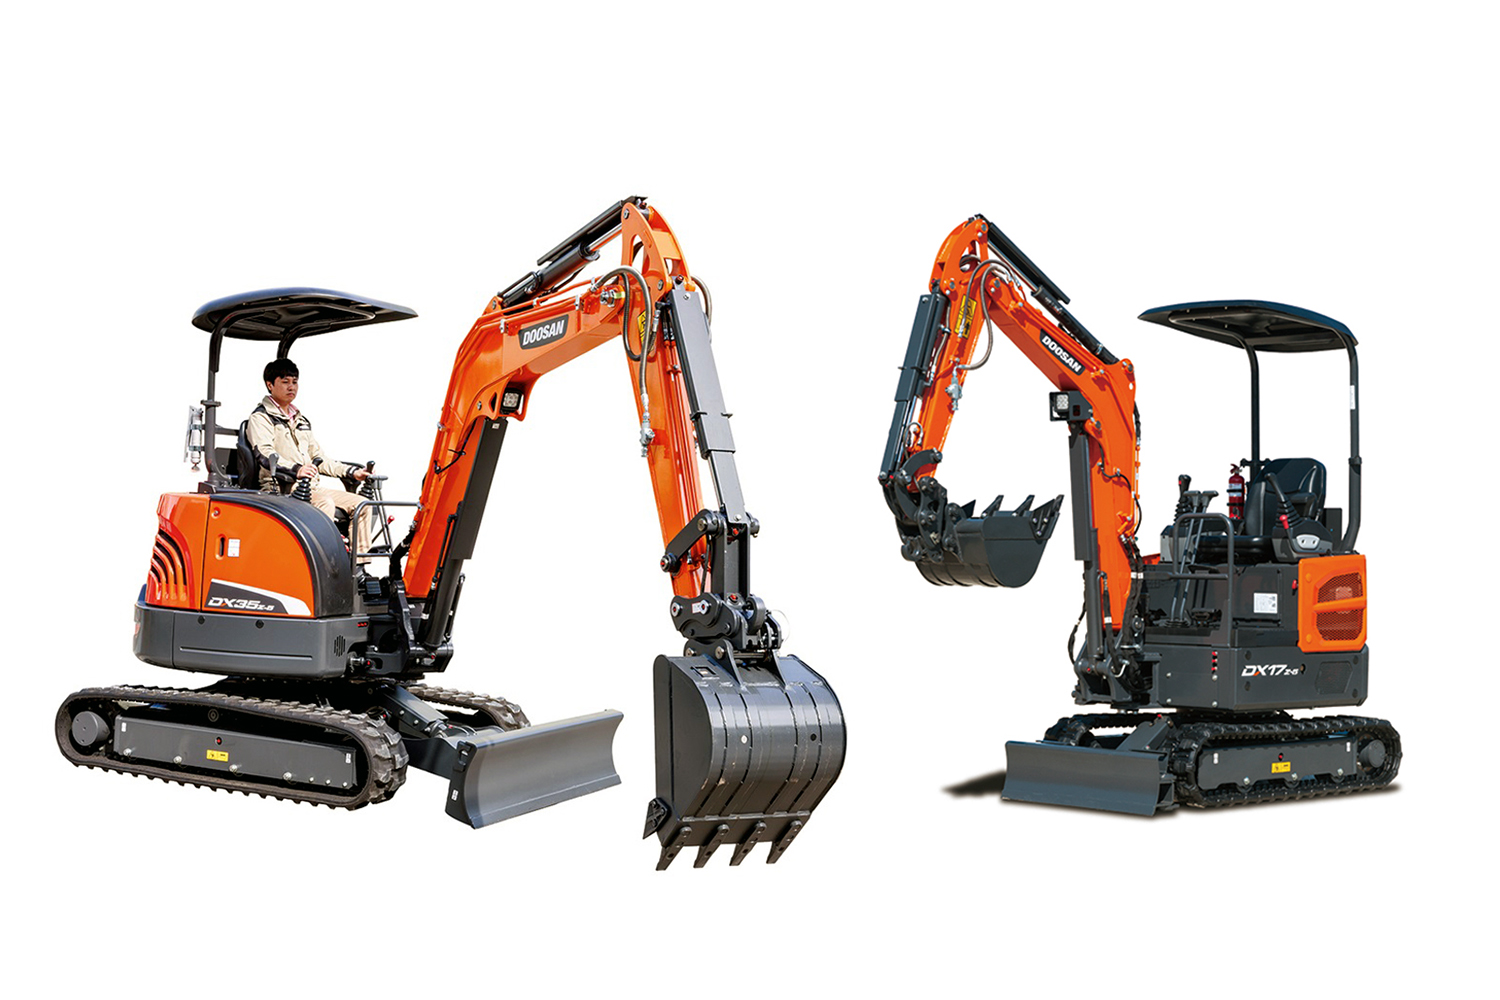 Doosan Infracore, which has been growing at a staggering rate in the Korean mini excavator market, recently launched the DX35z-5 (left) and DX17z-5 (right) mini excavators. 